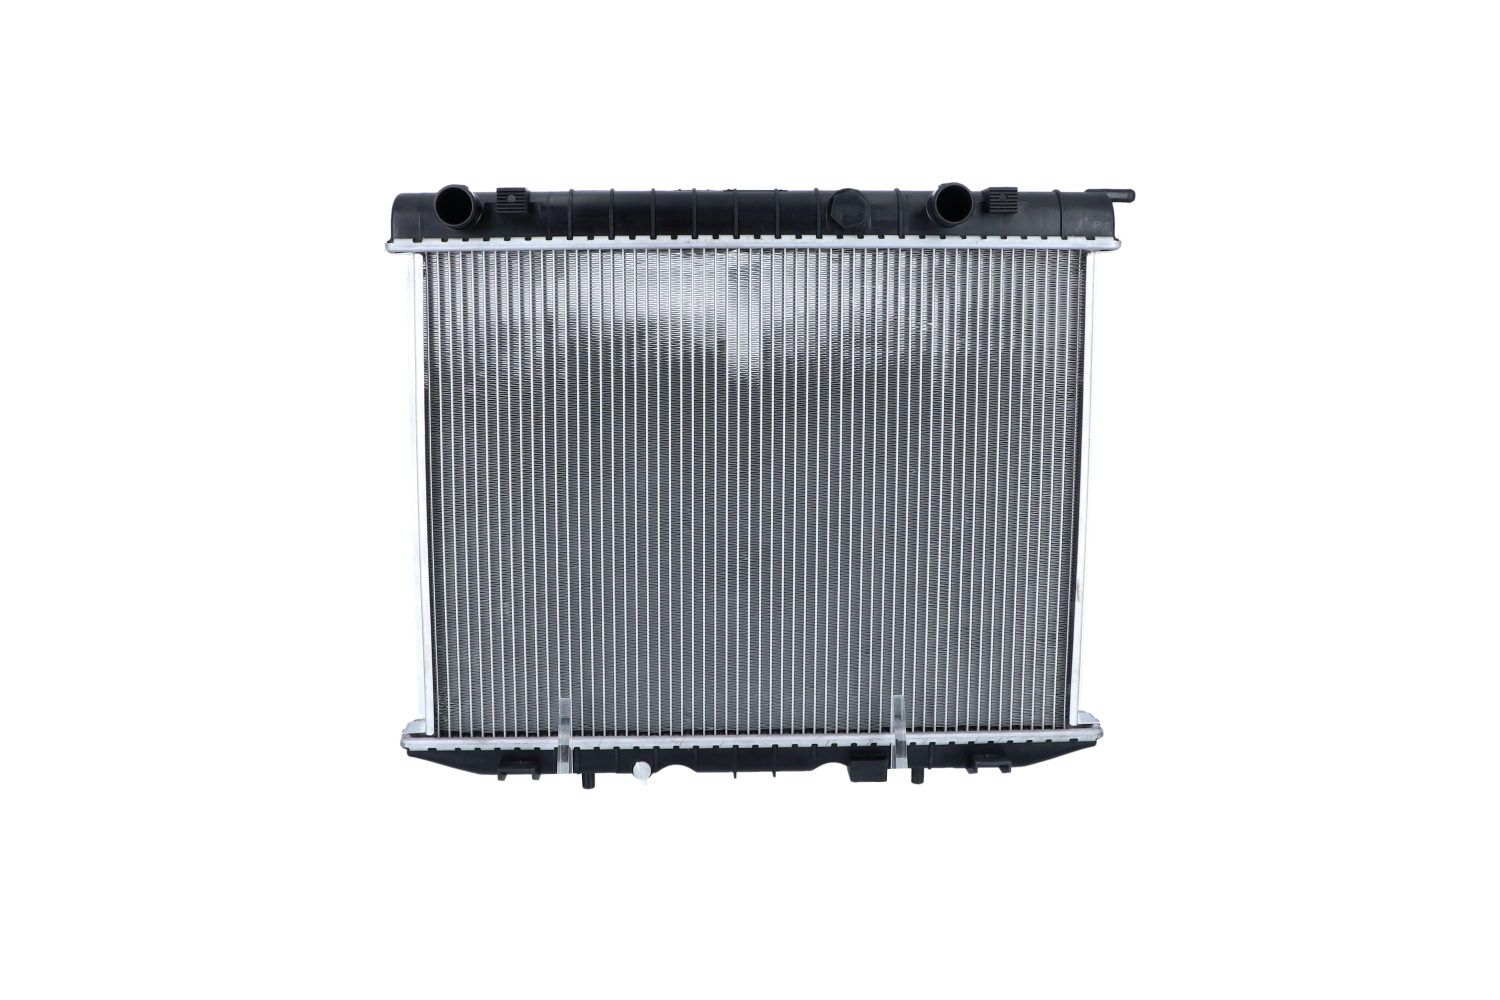 NRF 53940 Engine radiator Aluminium, 584 x 423 x 34 mm, with mounting parts, Brazed cooling fins